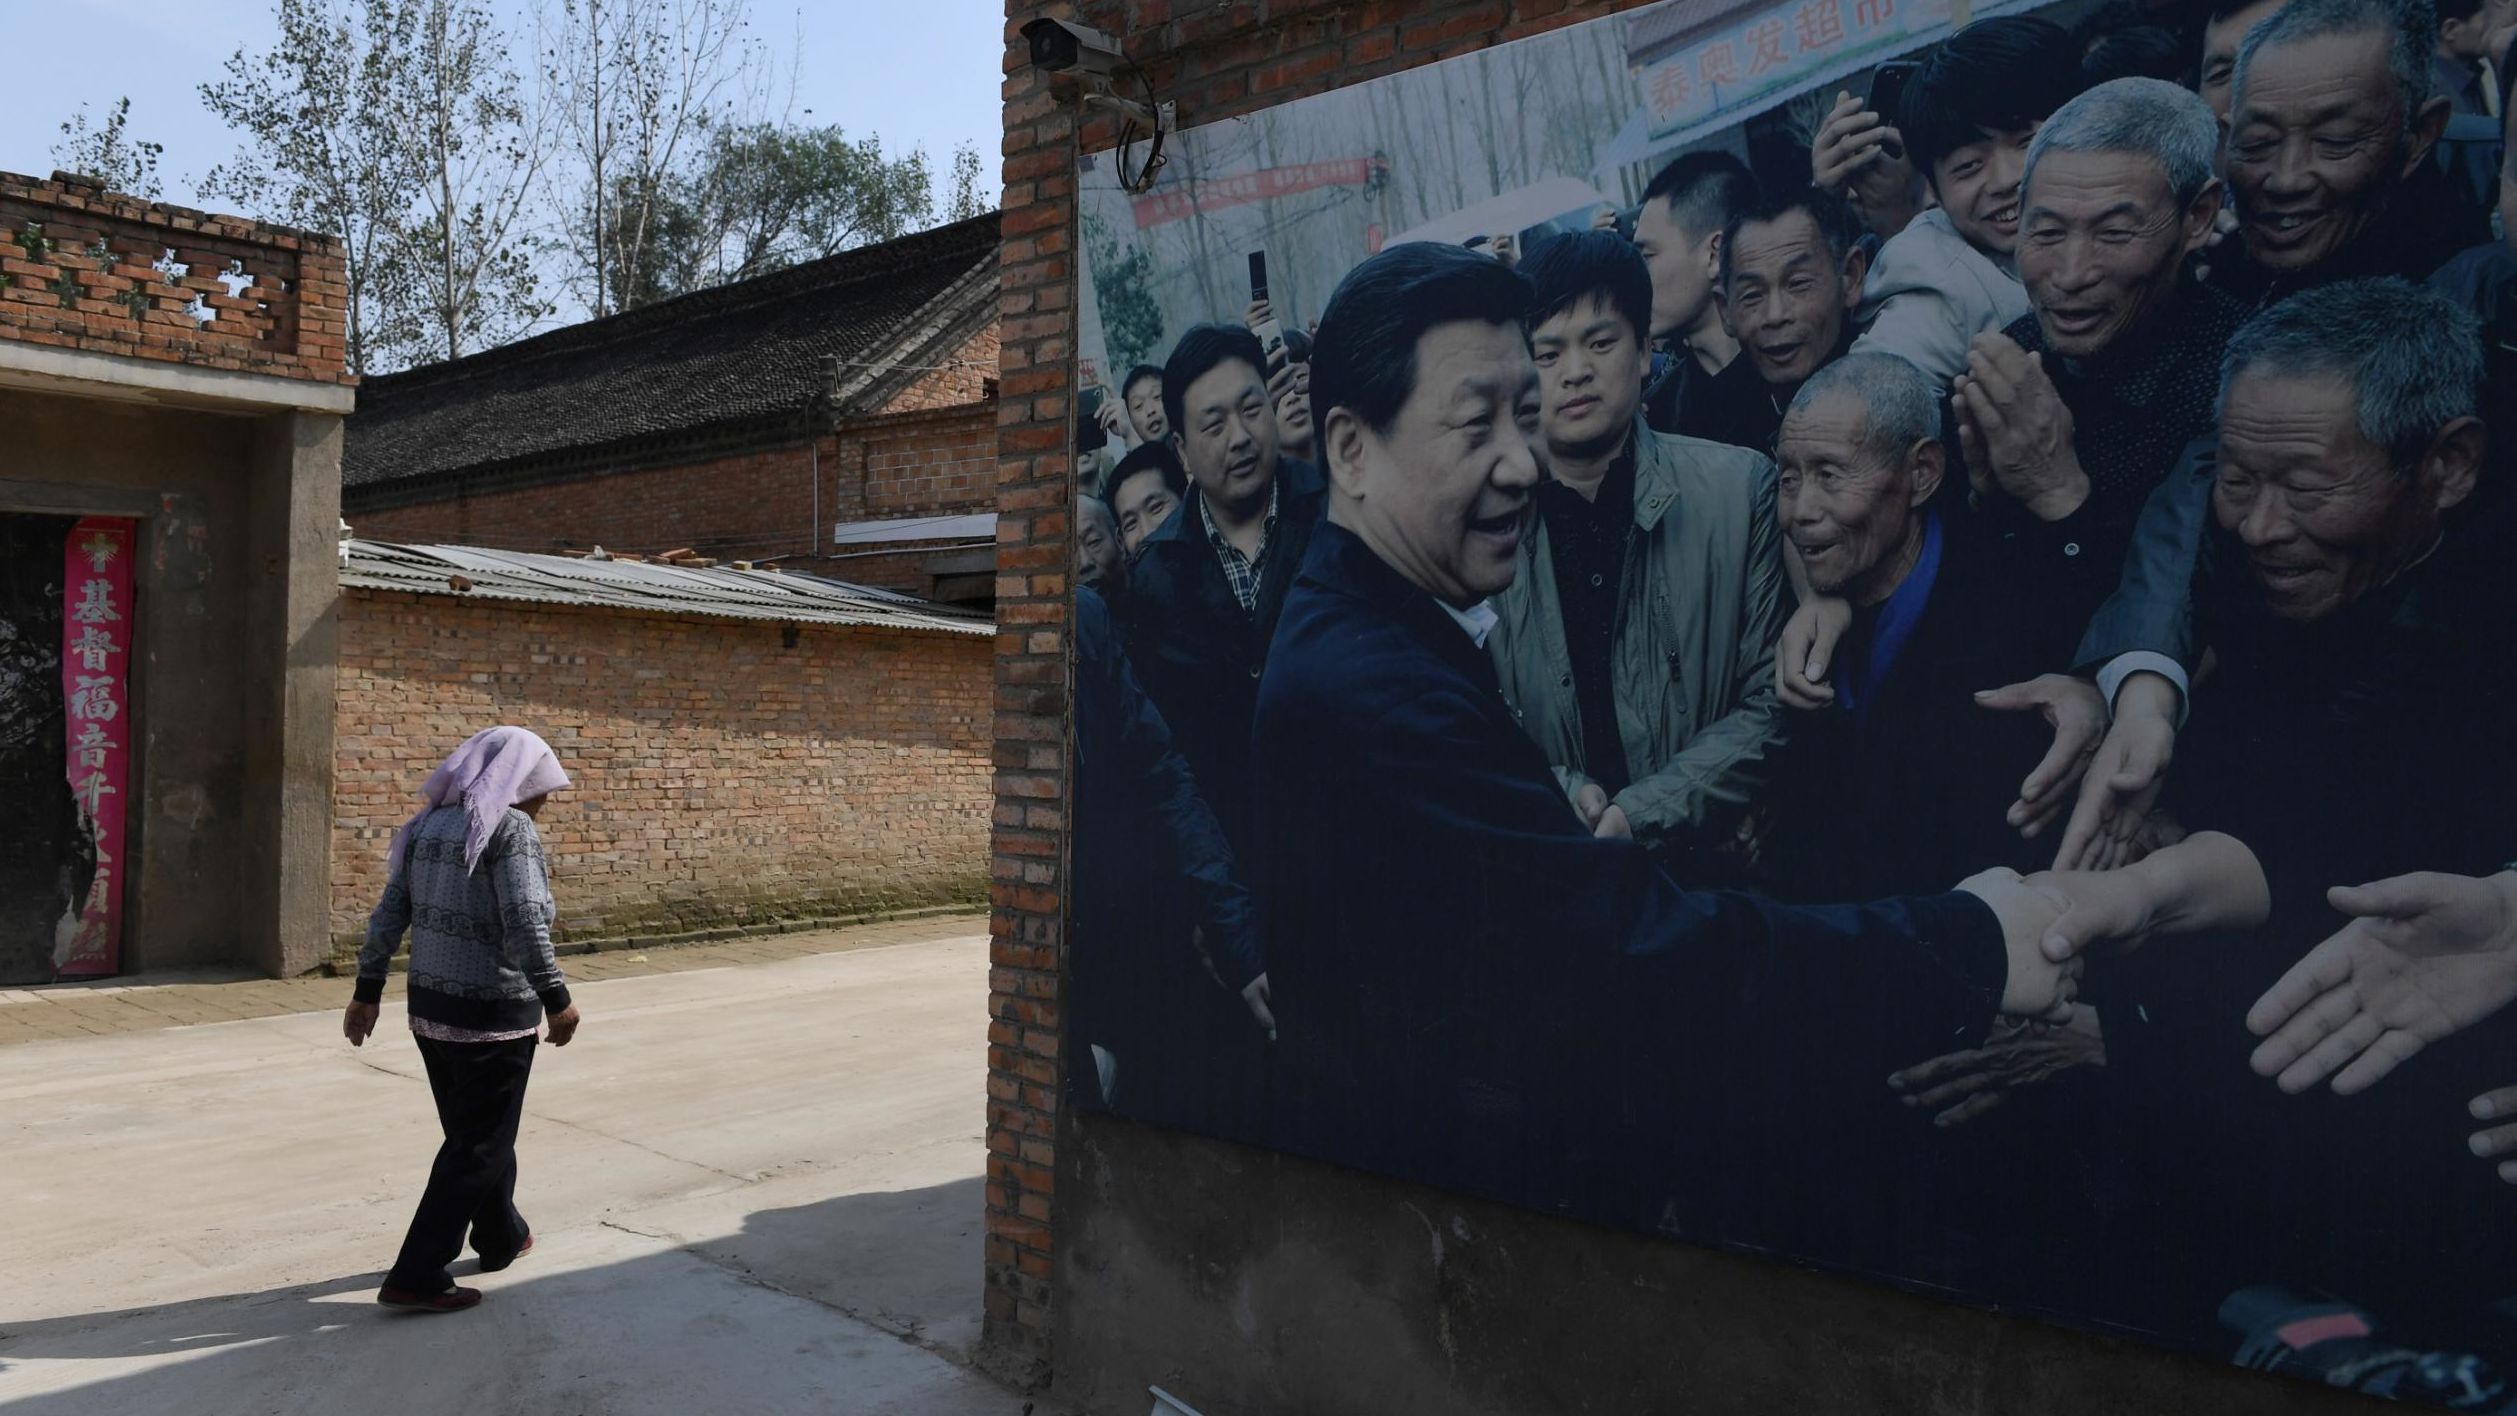 A photo taken on September 28, 2017 shows a billboard featuring a photo of China's President Xi Jinping visiting residents in Zhangzhuang village in Lankao in China's central Henan province.